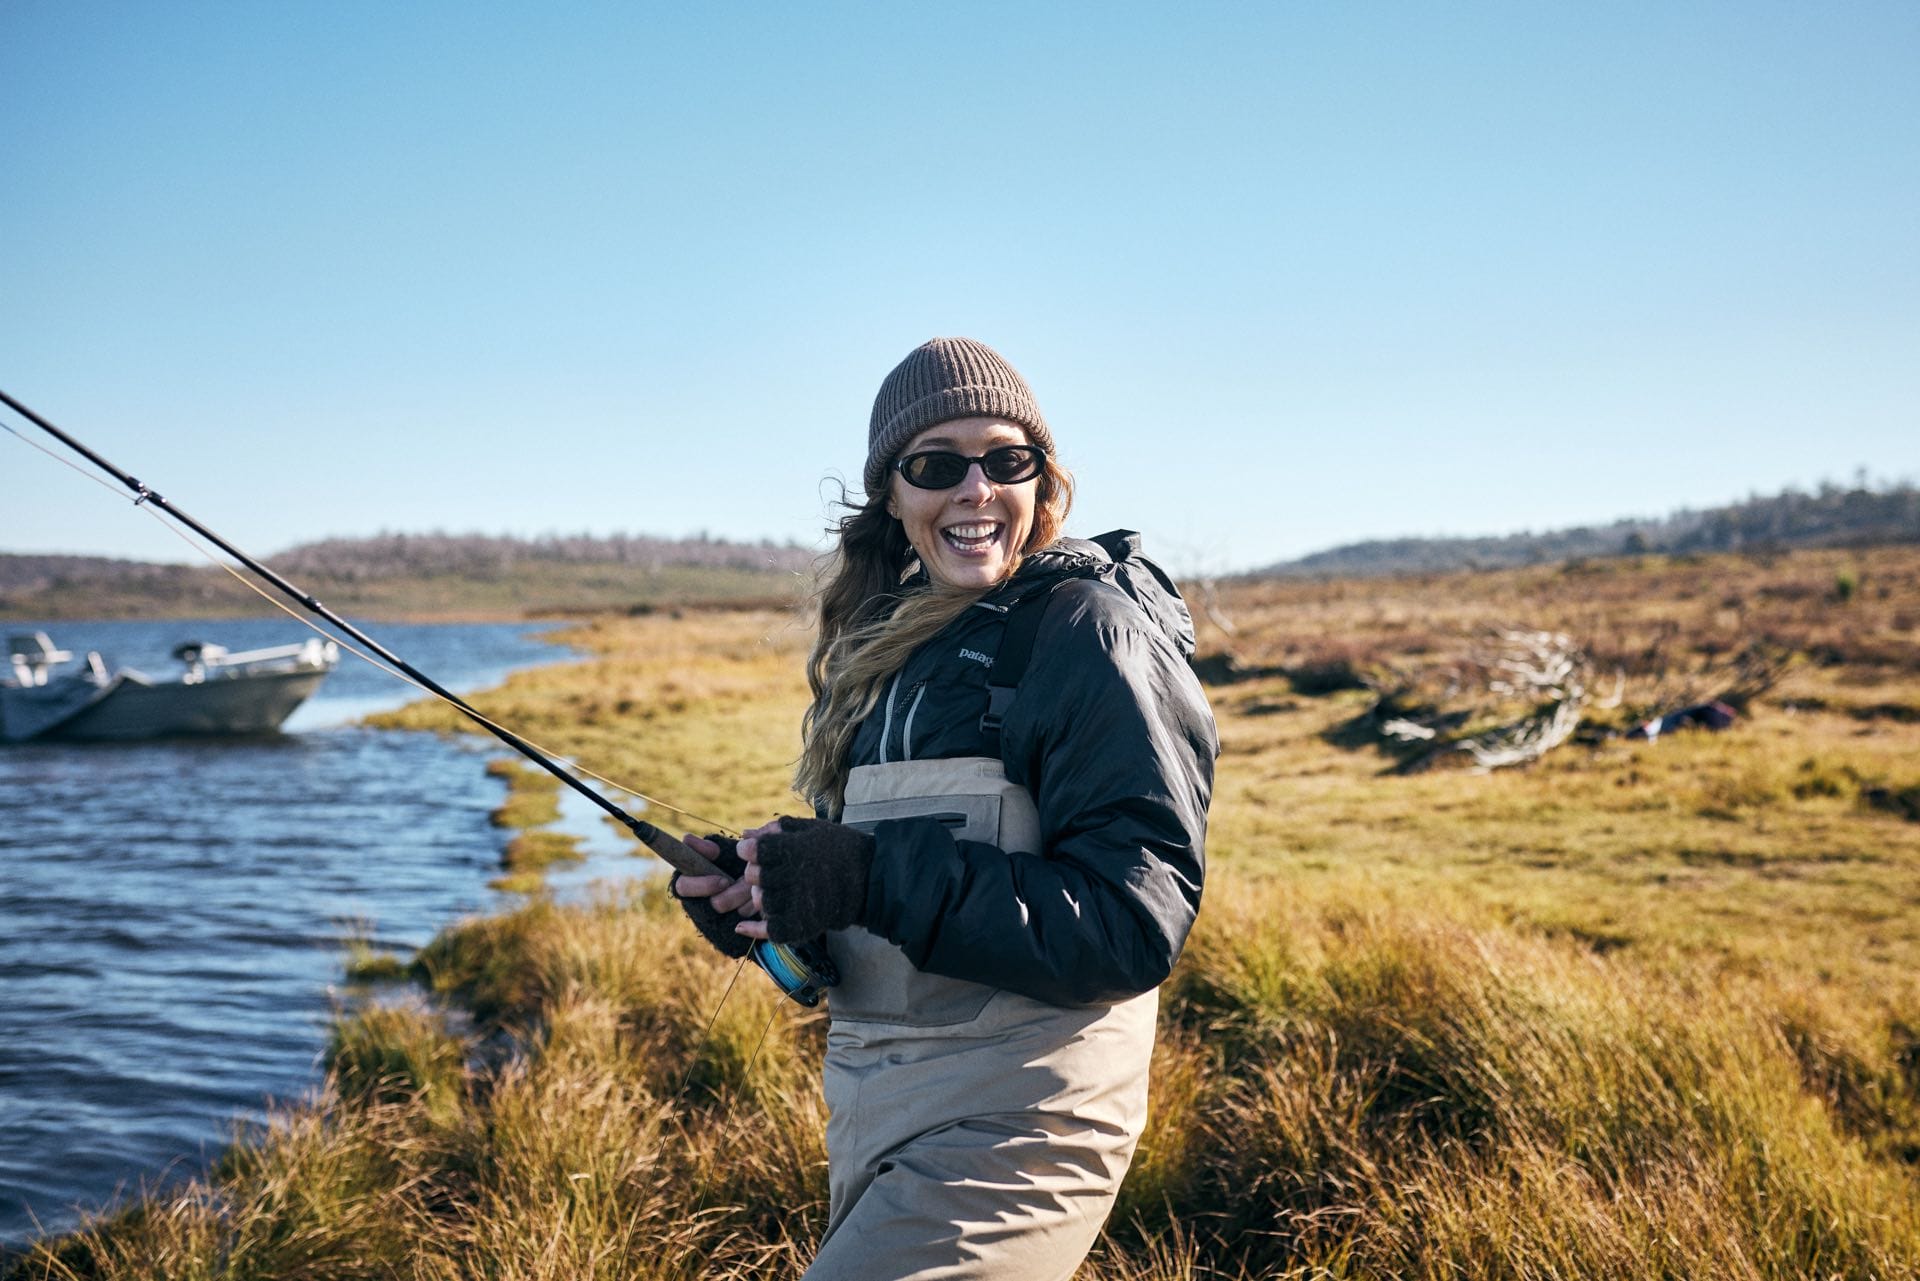 Highland Fly Guide — Fly fishing guide Tasmania - The Highland Fly